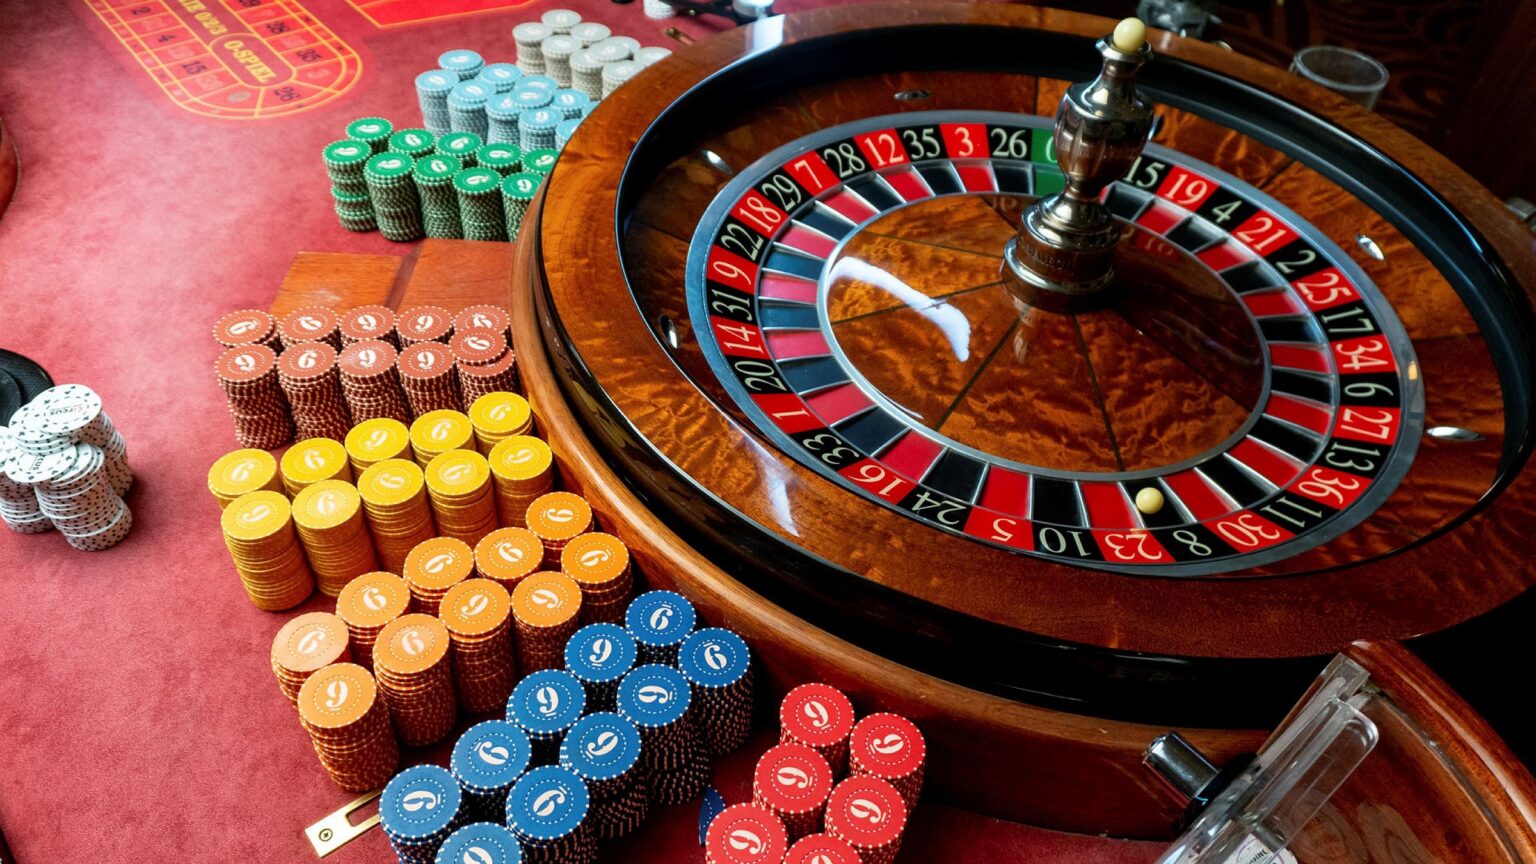 Casinos provide interesting mise-en-scene in movies and TV shows. Here are some of the best TV show episodes for casino fans.